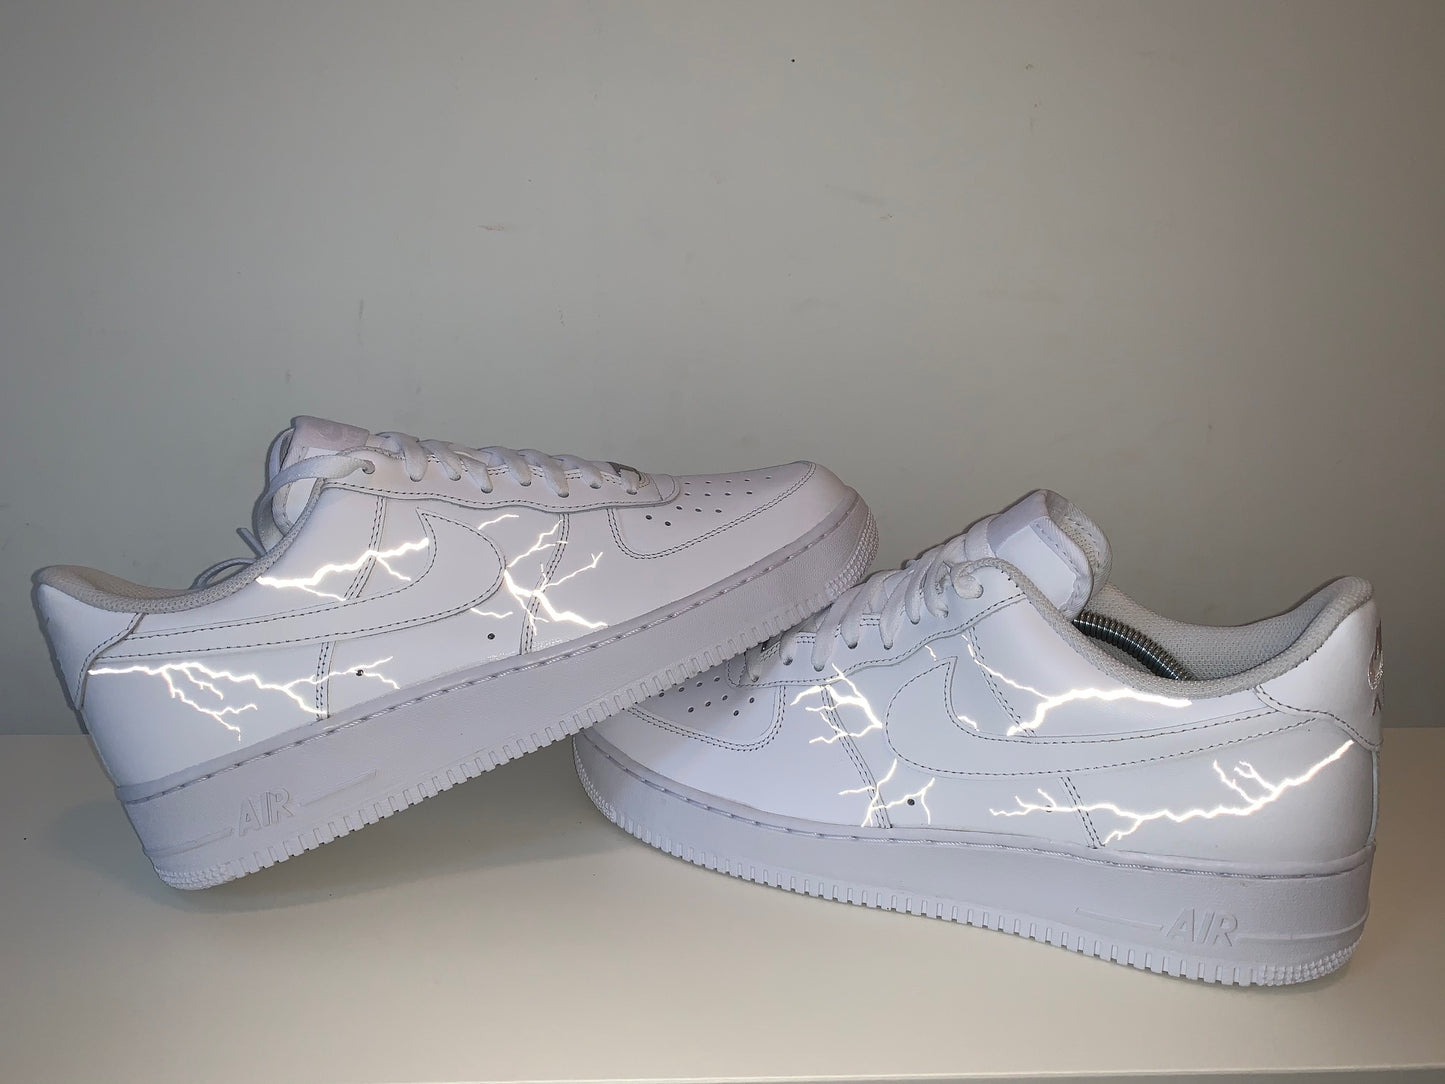 Customized Nike Air Force 1's (Reflective Lightning)